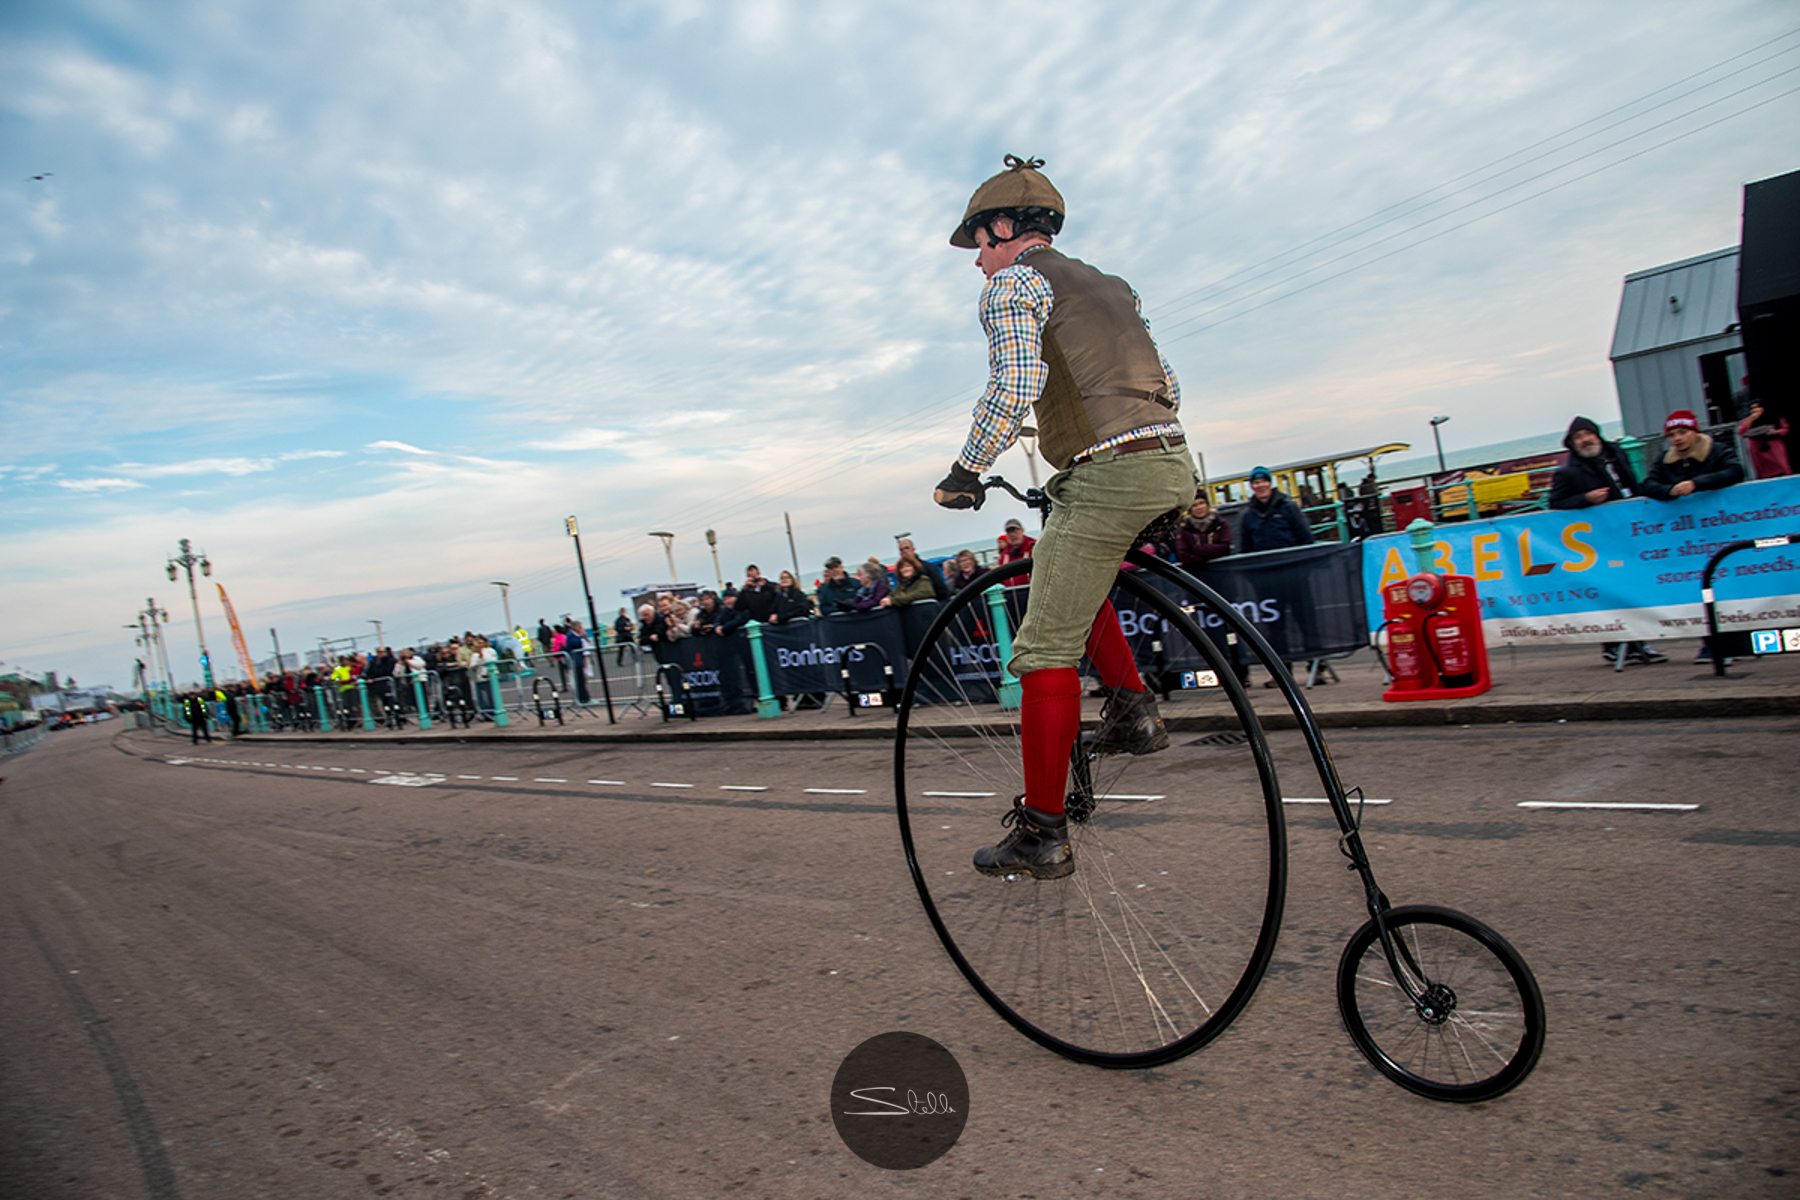  A wonderful Penny Farthing made the journey from London to Brighton. 